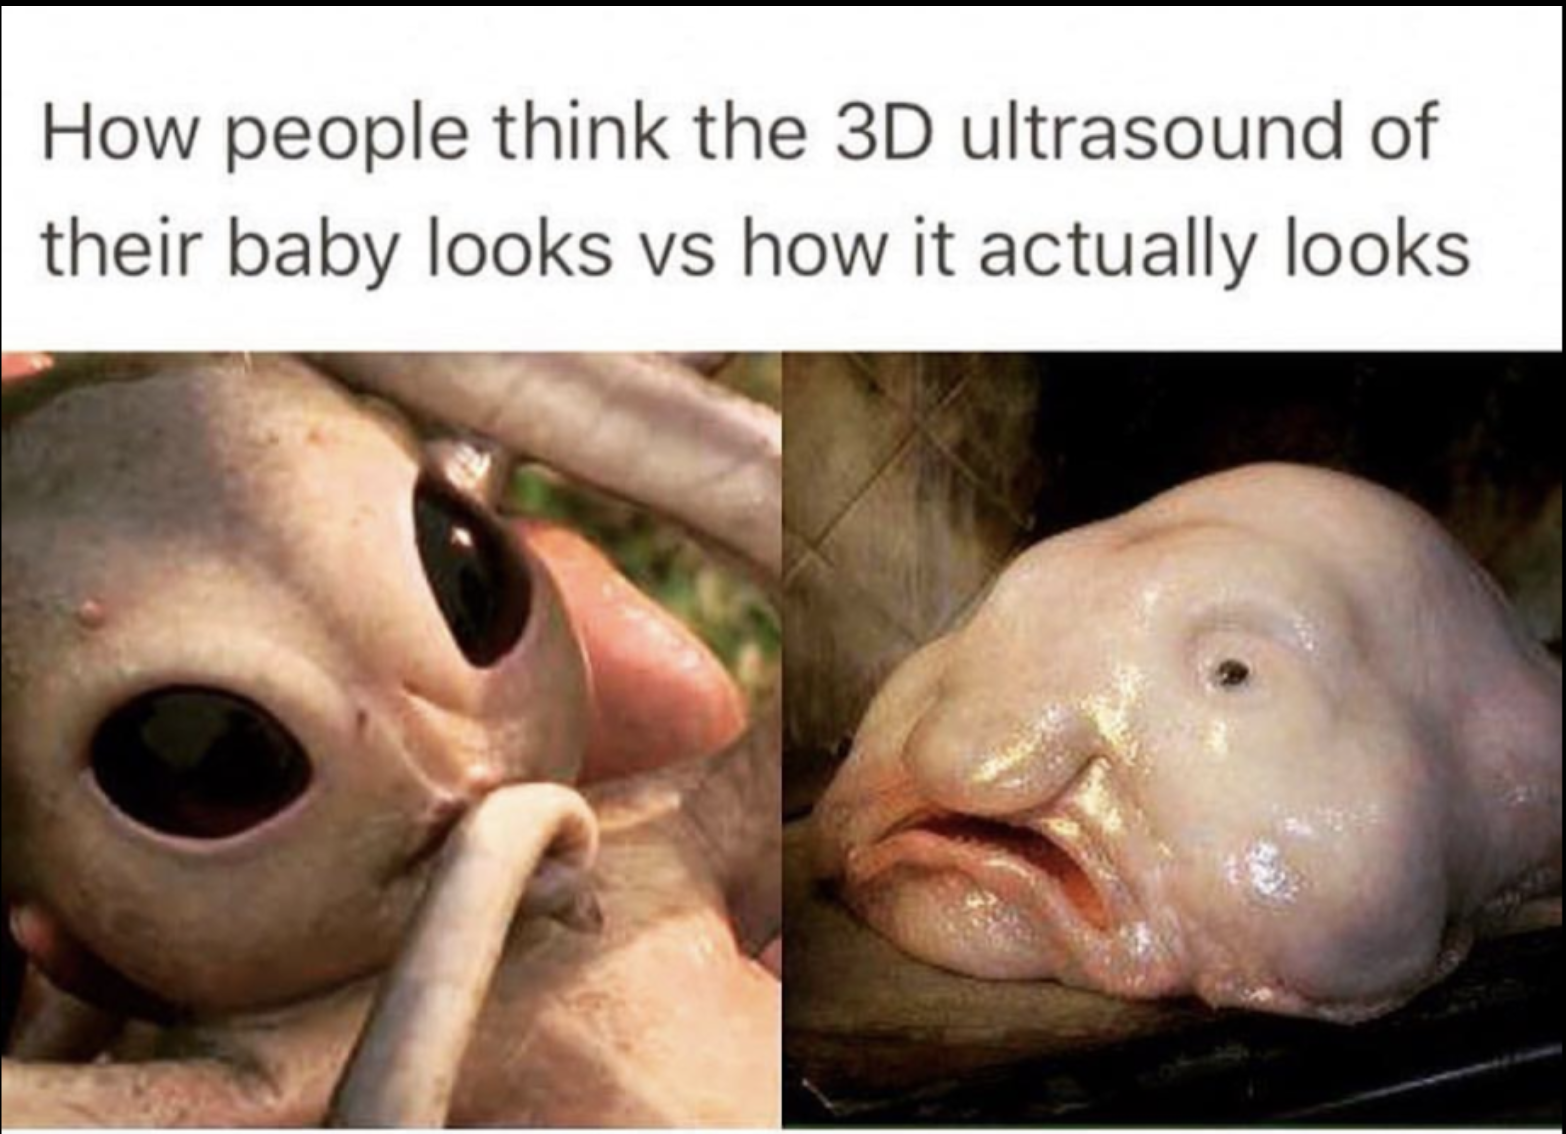 mouth - How people think the 3D ultrasound of their baby looks vs how it actually looks